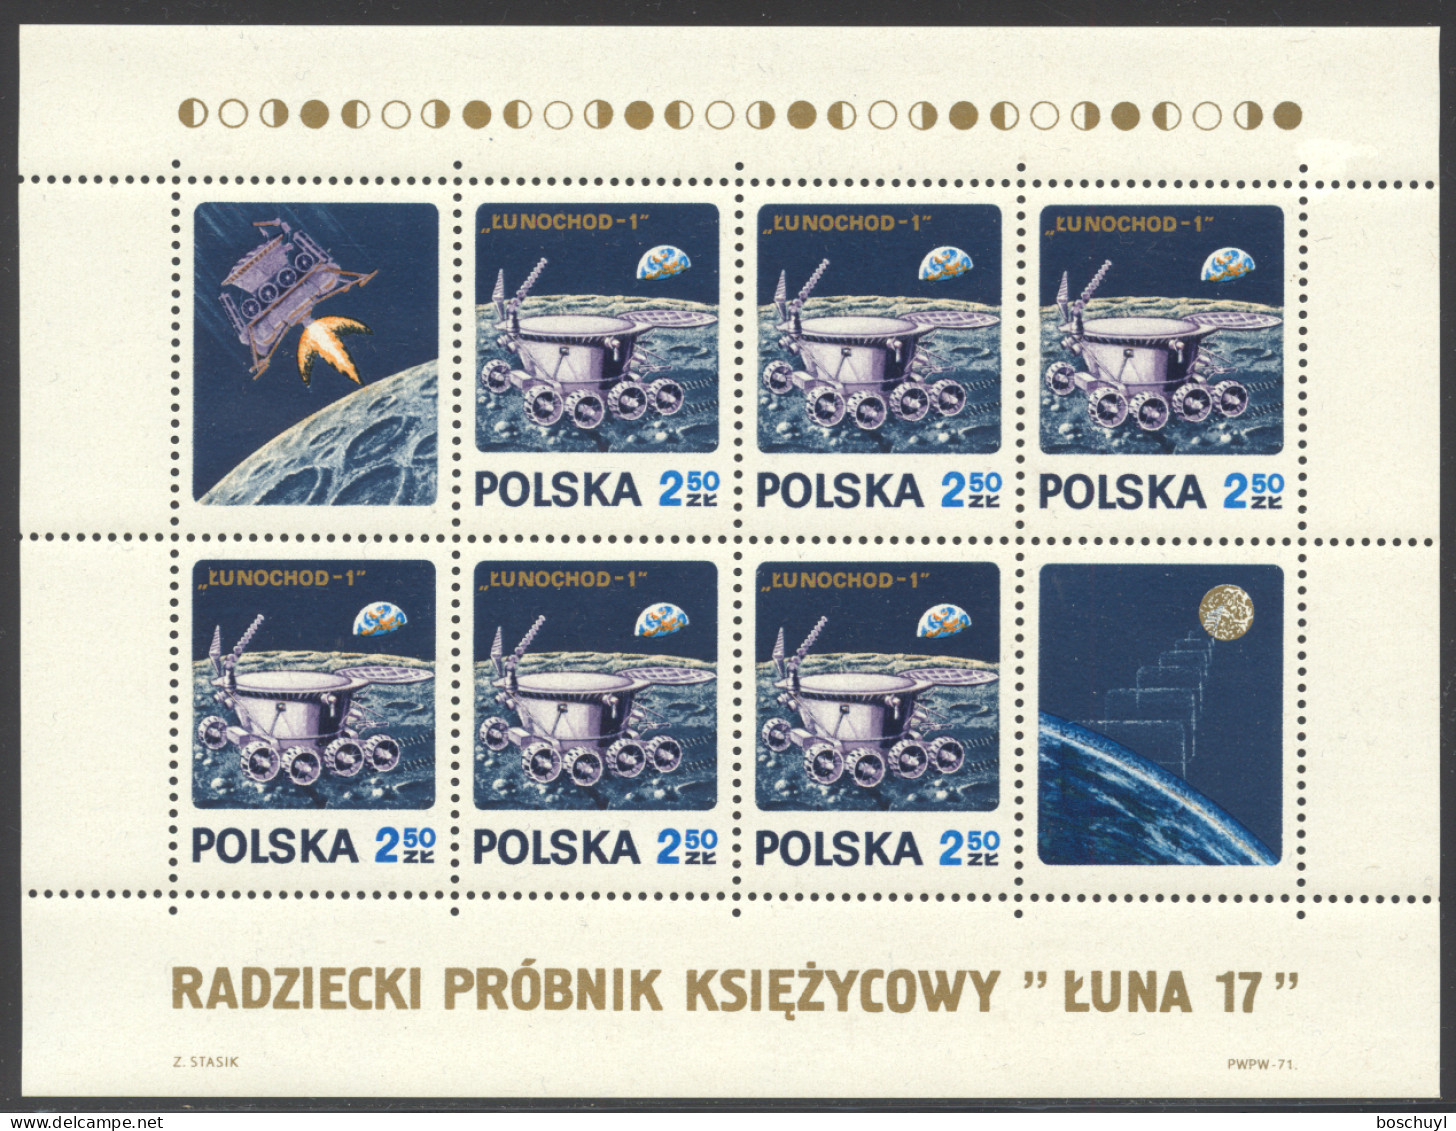 Poland, 1971, Space, Lunochod, MNH Sheetlet, Michel Block 47 - Unused Stamps